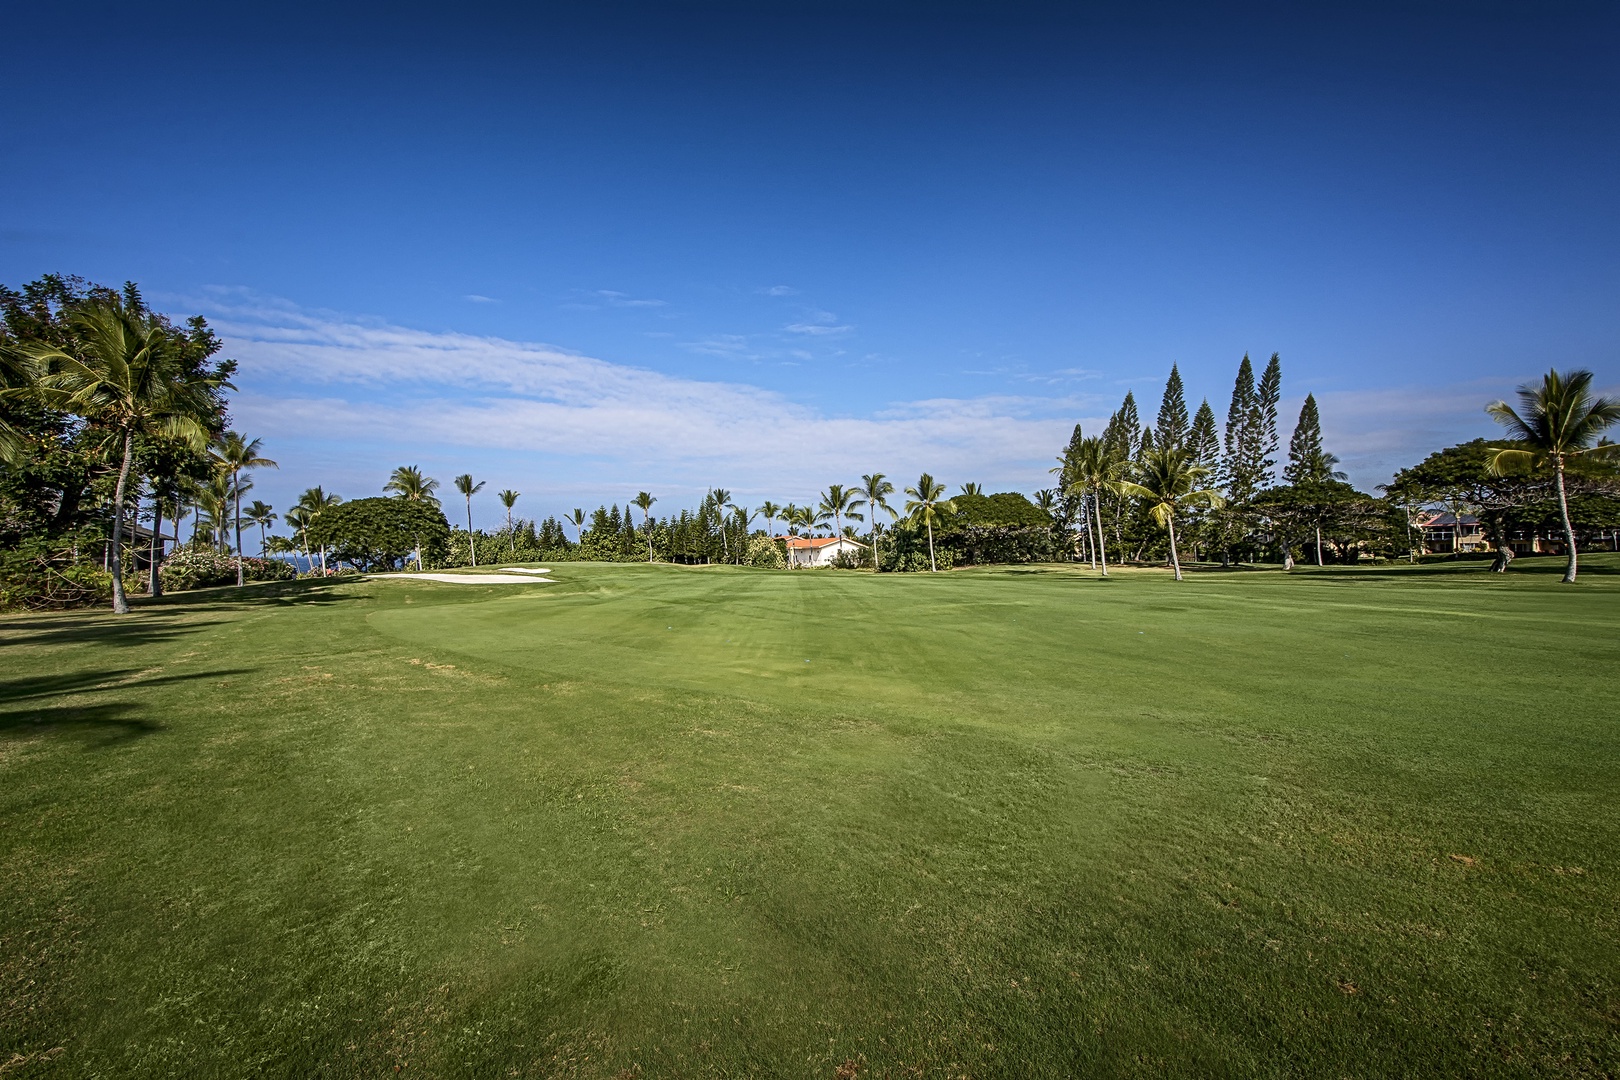 Kailua Kona Vacation Rentals, Kanaloa 701 - In addition to 1,600 acres of tropical landscaping overlooking Keauhou Bay, this property has golf course views, two resurfaced tennis courts and three sparkling ocean-facing swimming pools for your maximum enjoyment.